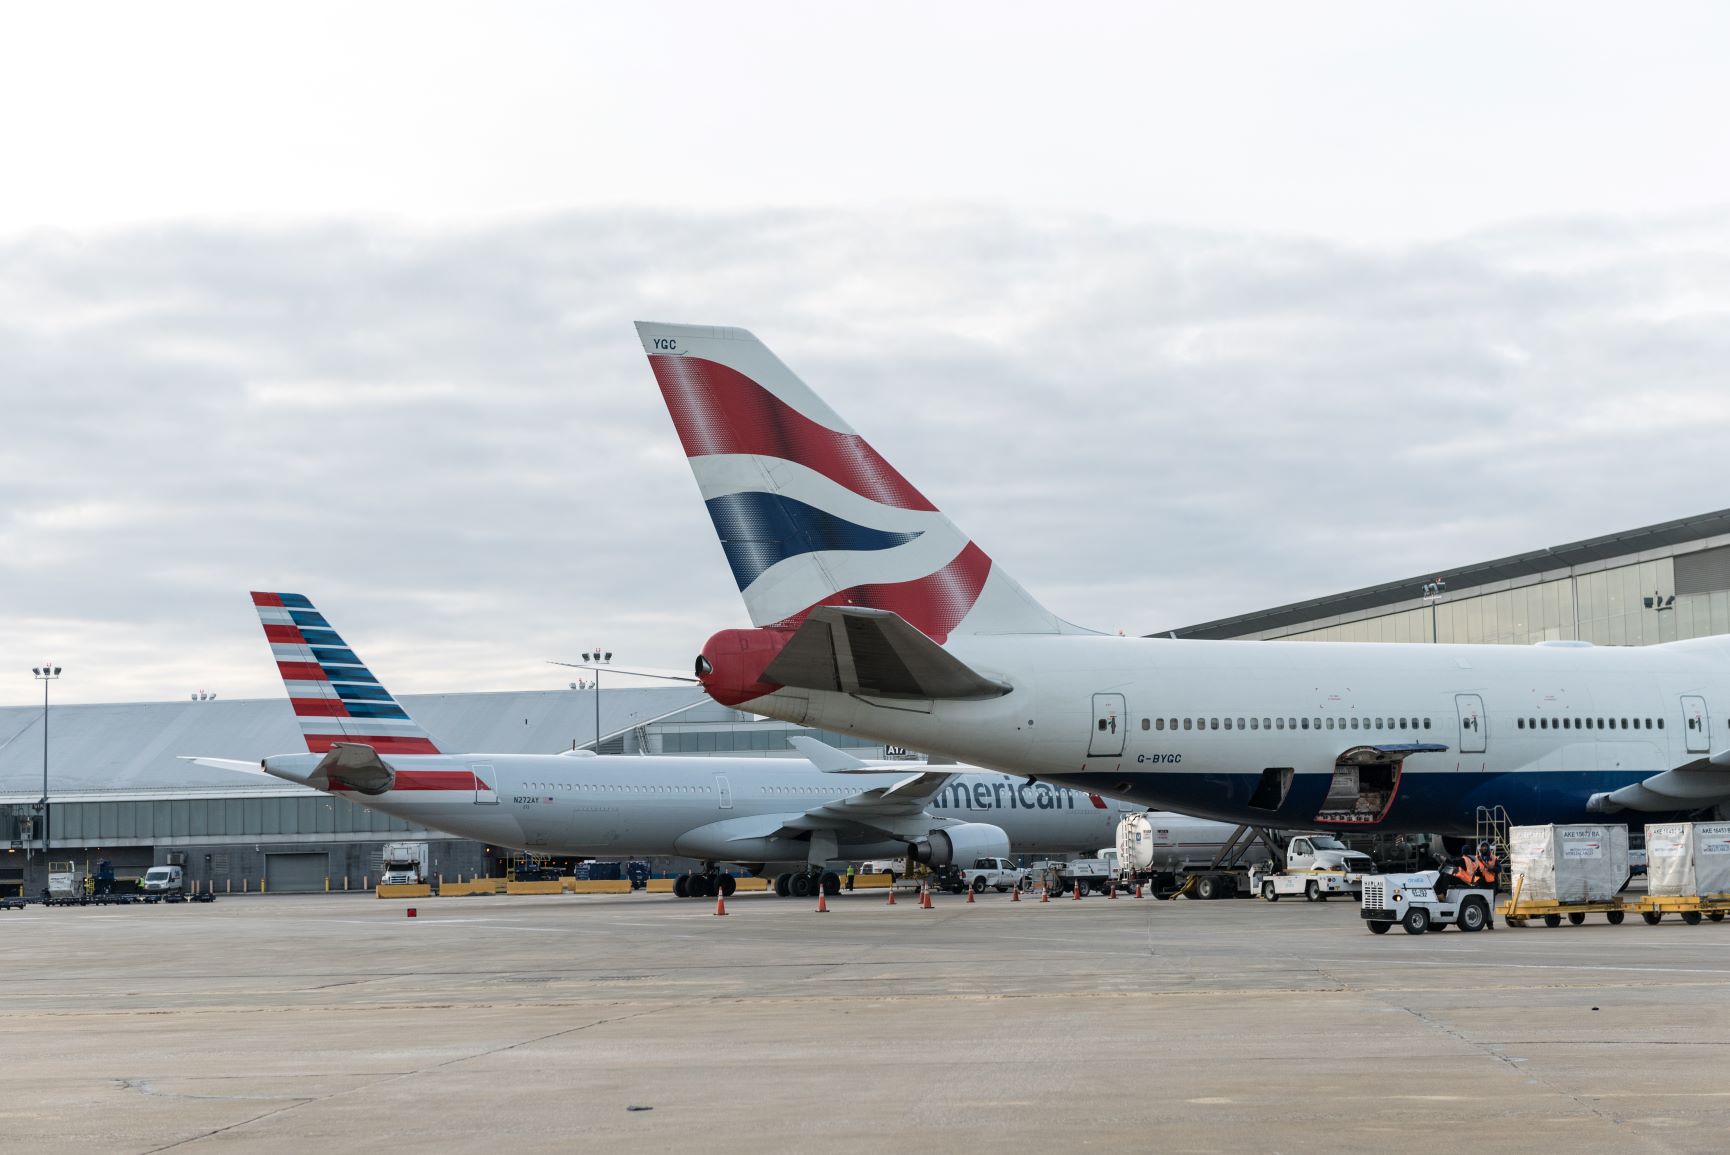 british airways and american airlines planes